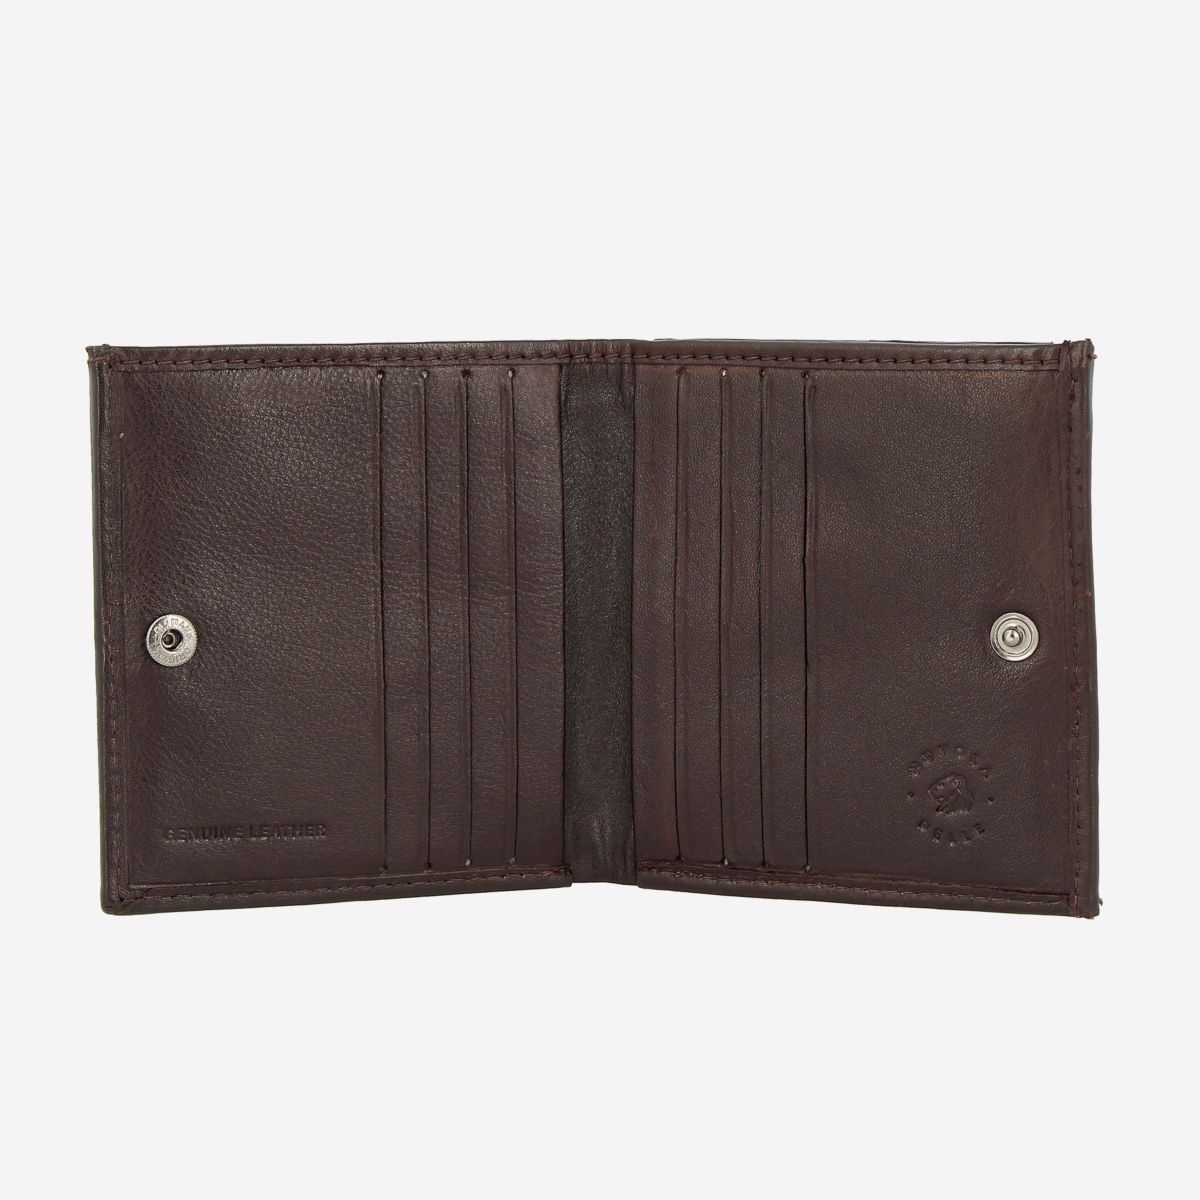 NUVOLA PELLE Small Unique Leather Wallet  - Dark Brown